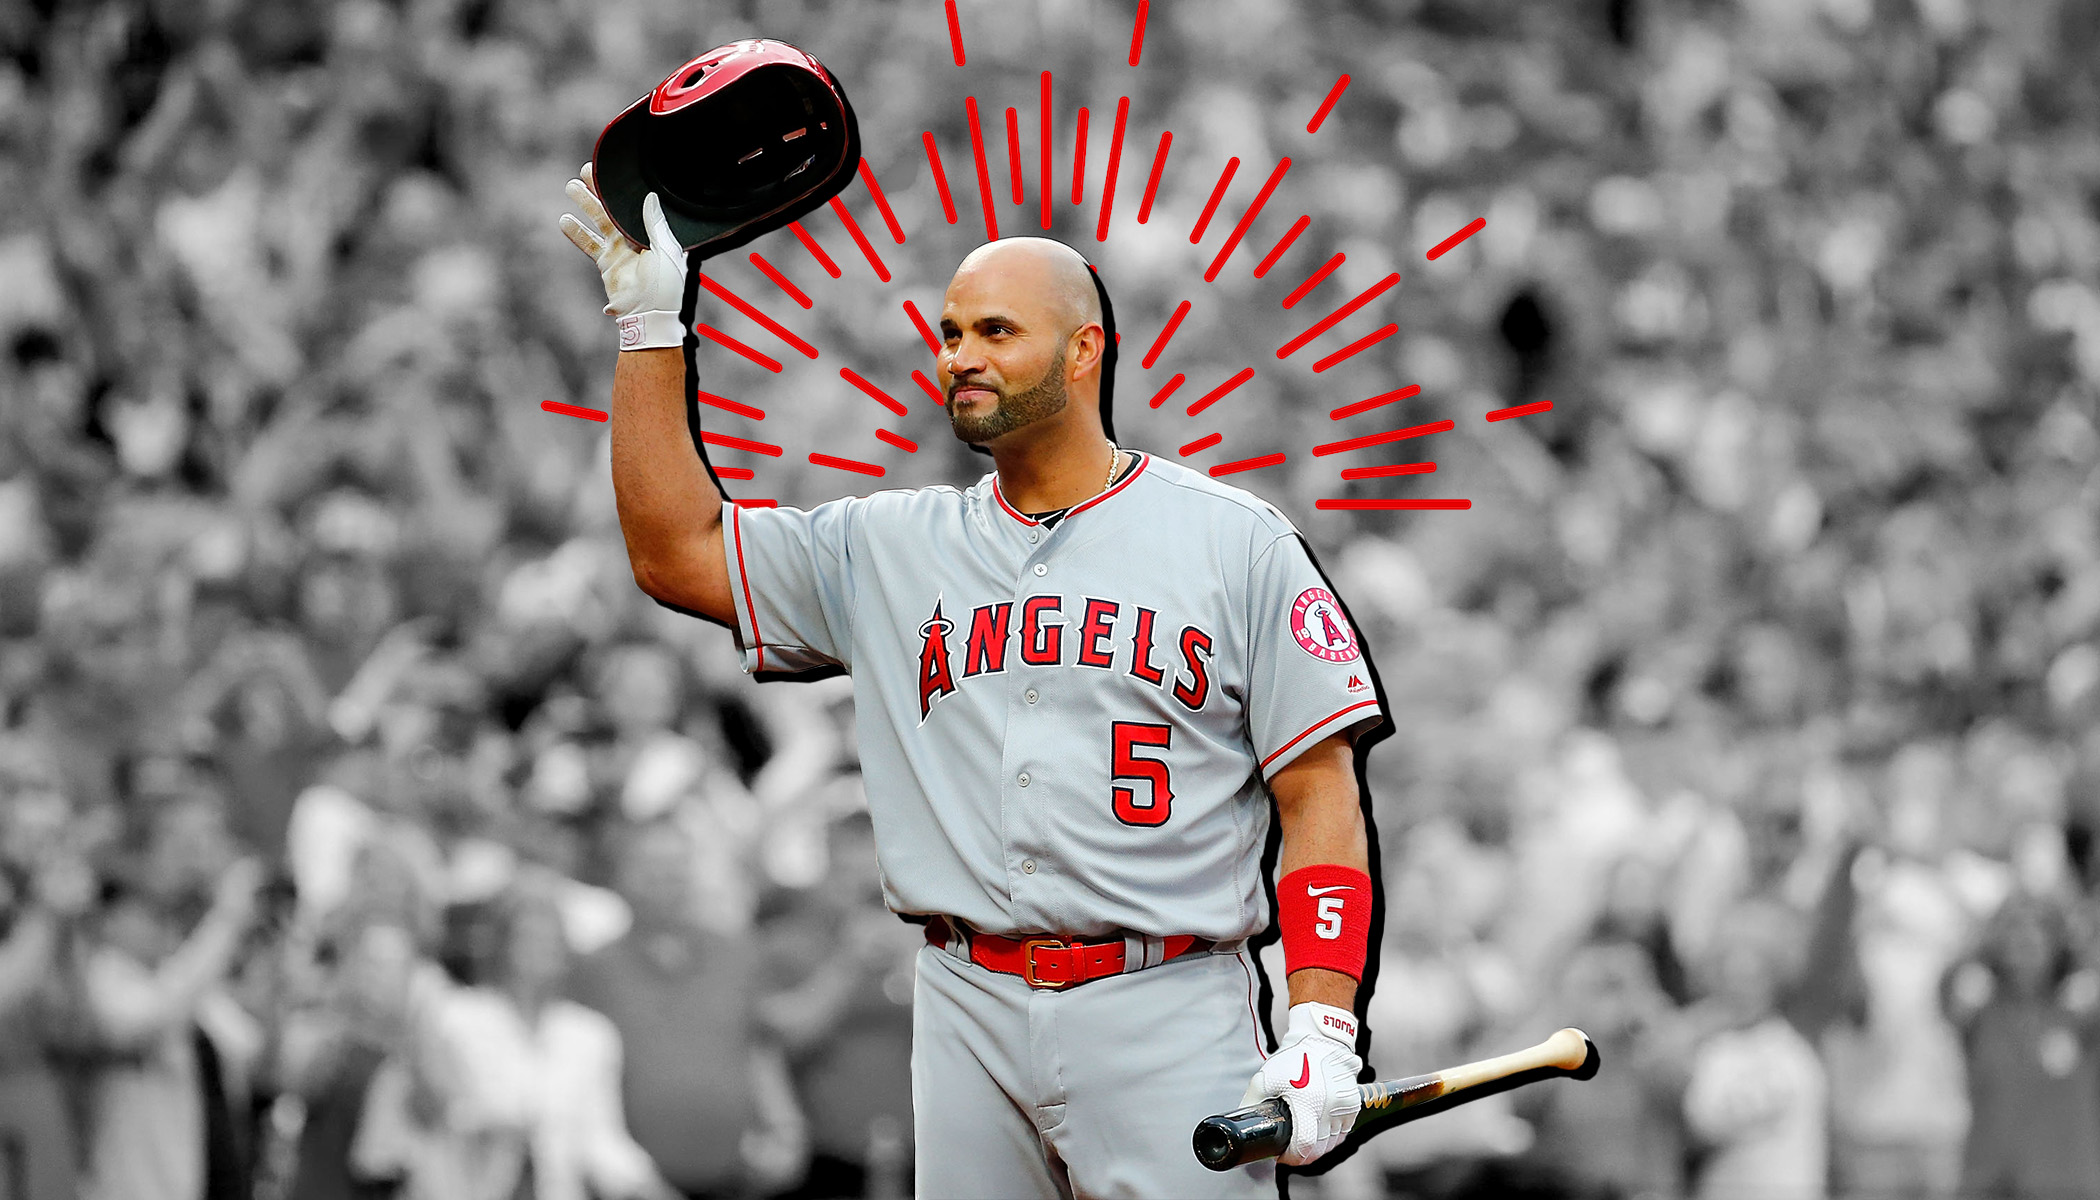 One of the greatest humans on and off the field, there will never be  another Albert Pujols 🇩🇴 #HispanicHeritageMonth